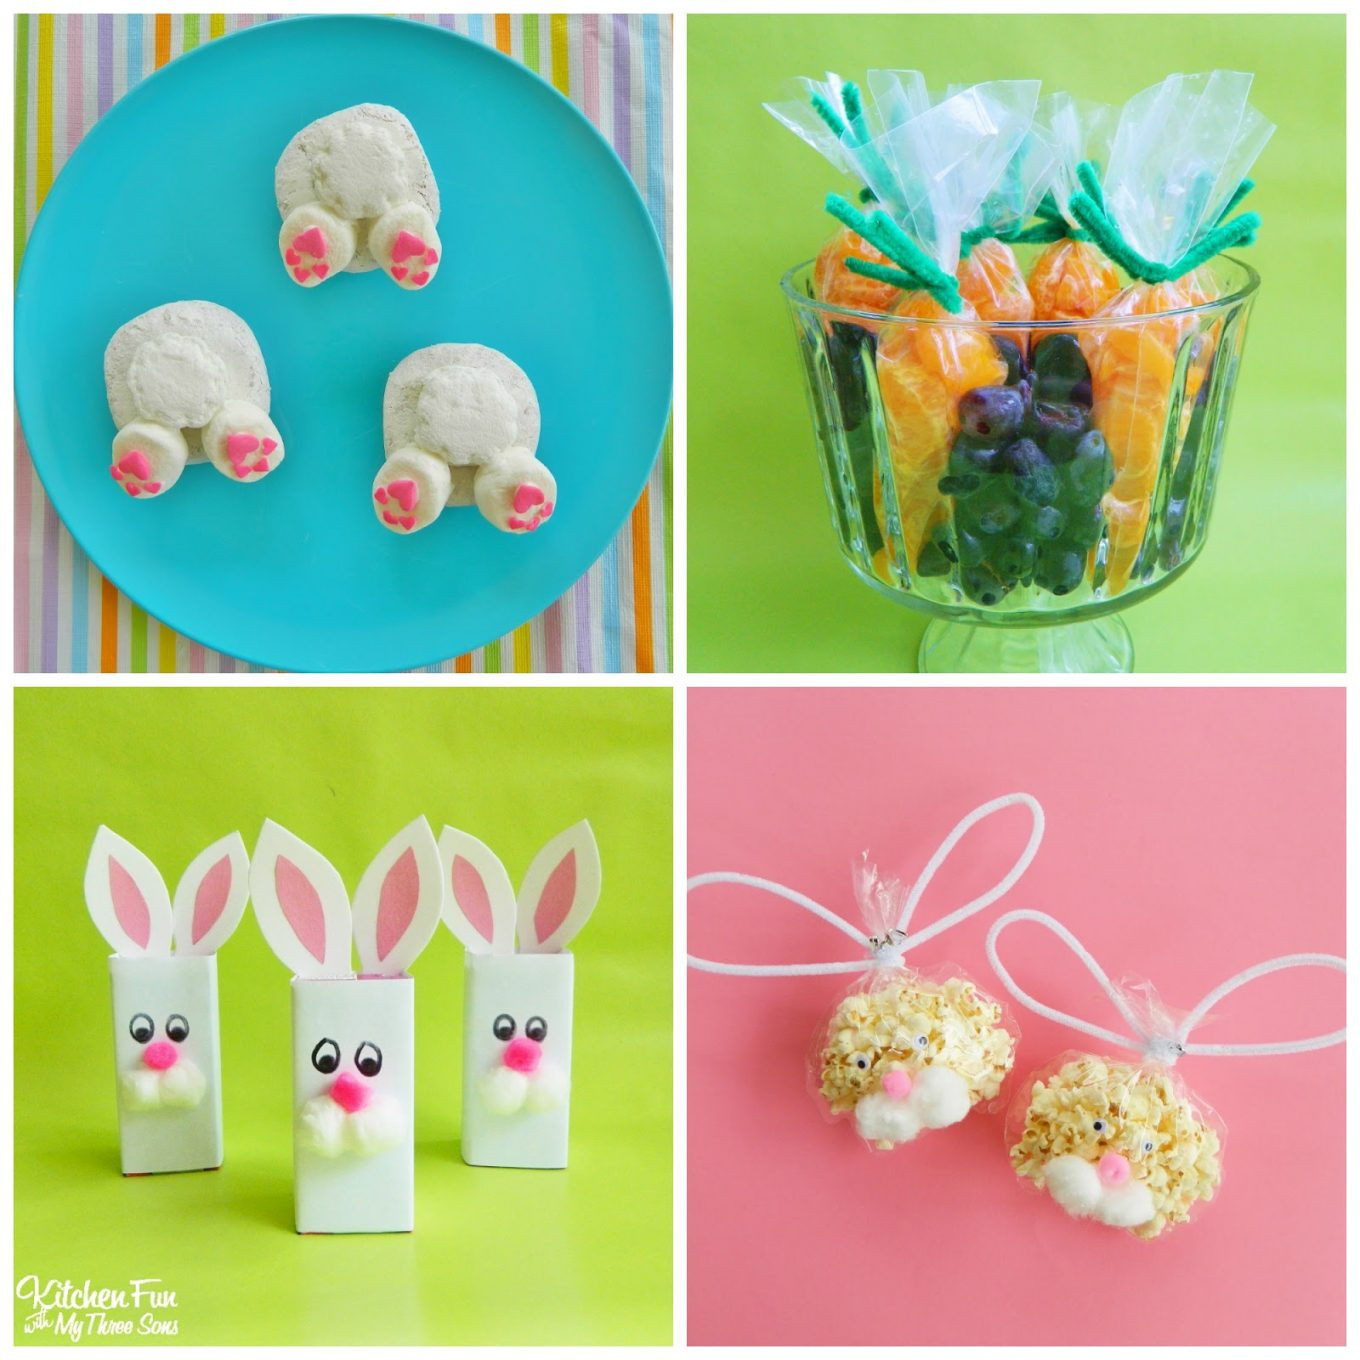 Kindergarten Easter Party Food Ideas
 Preschool Easter Party with Bunny Butt Donuts Fruit